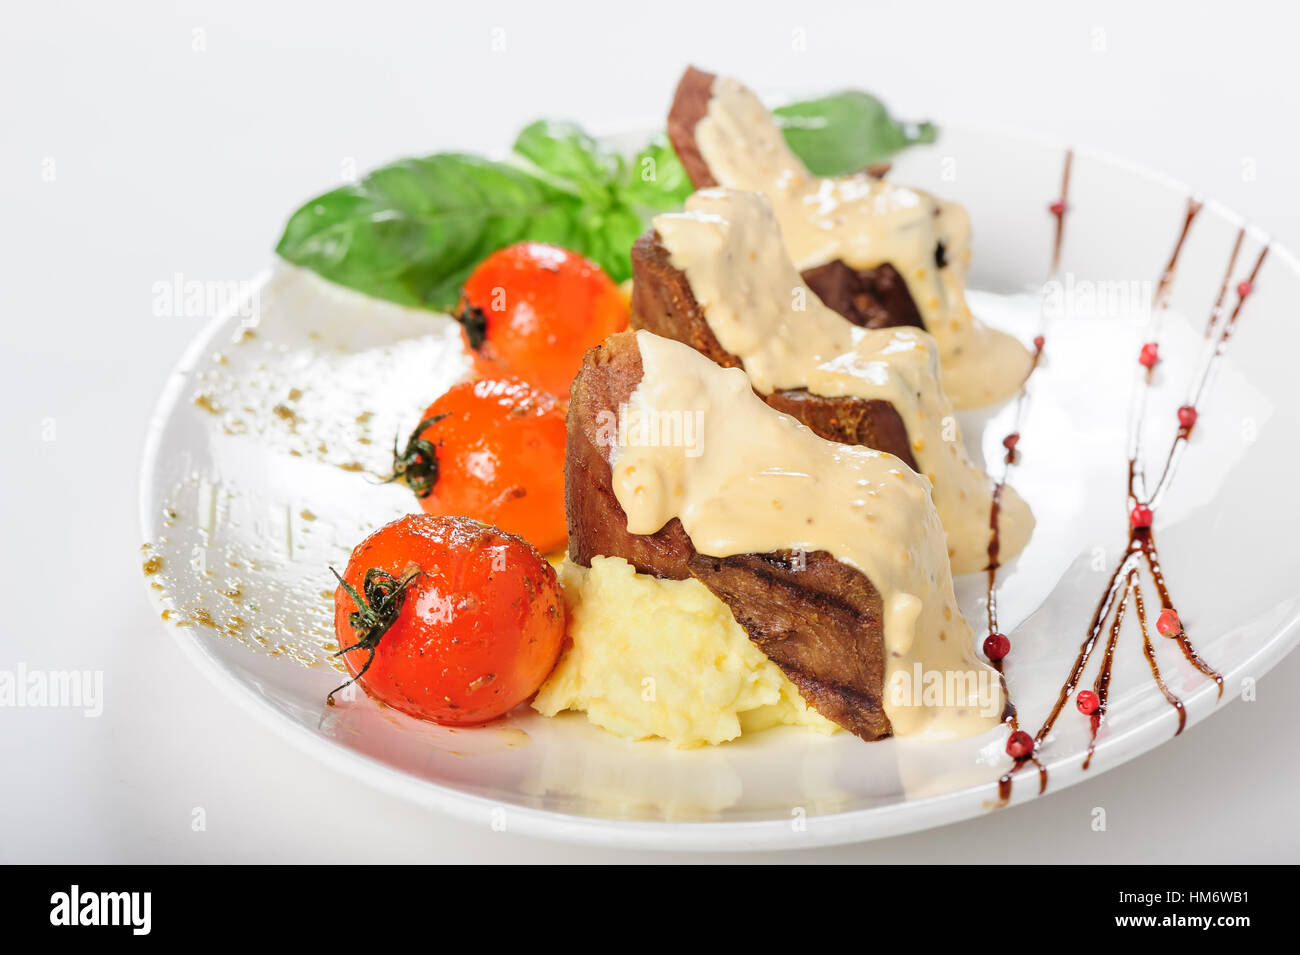 Baked mutton meat with creamy sauce, mashed potato and cherry tomatoes Stock Photo